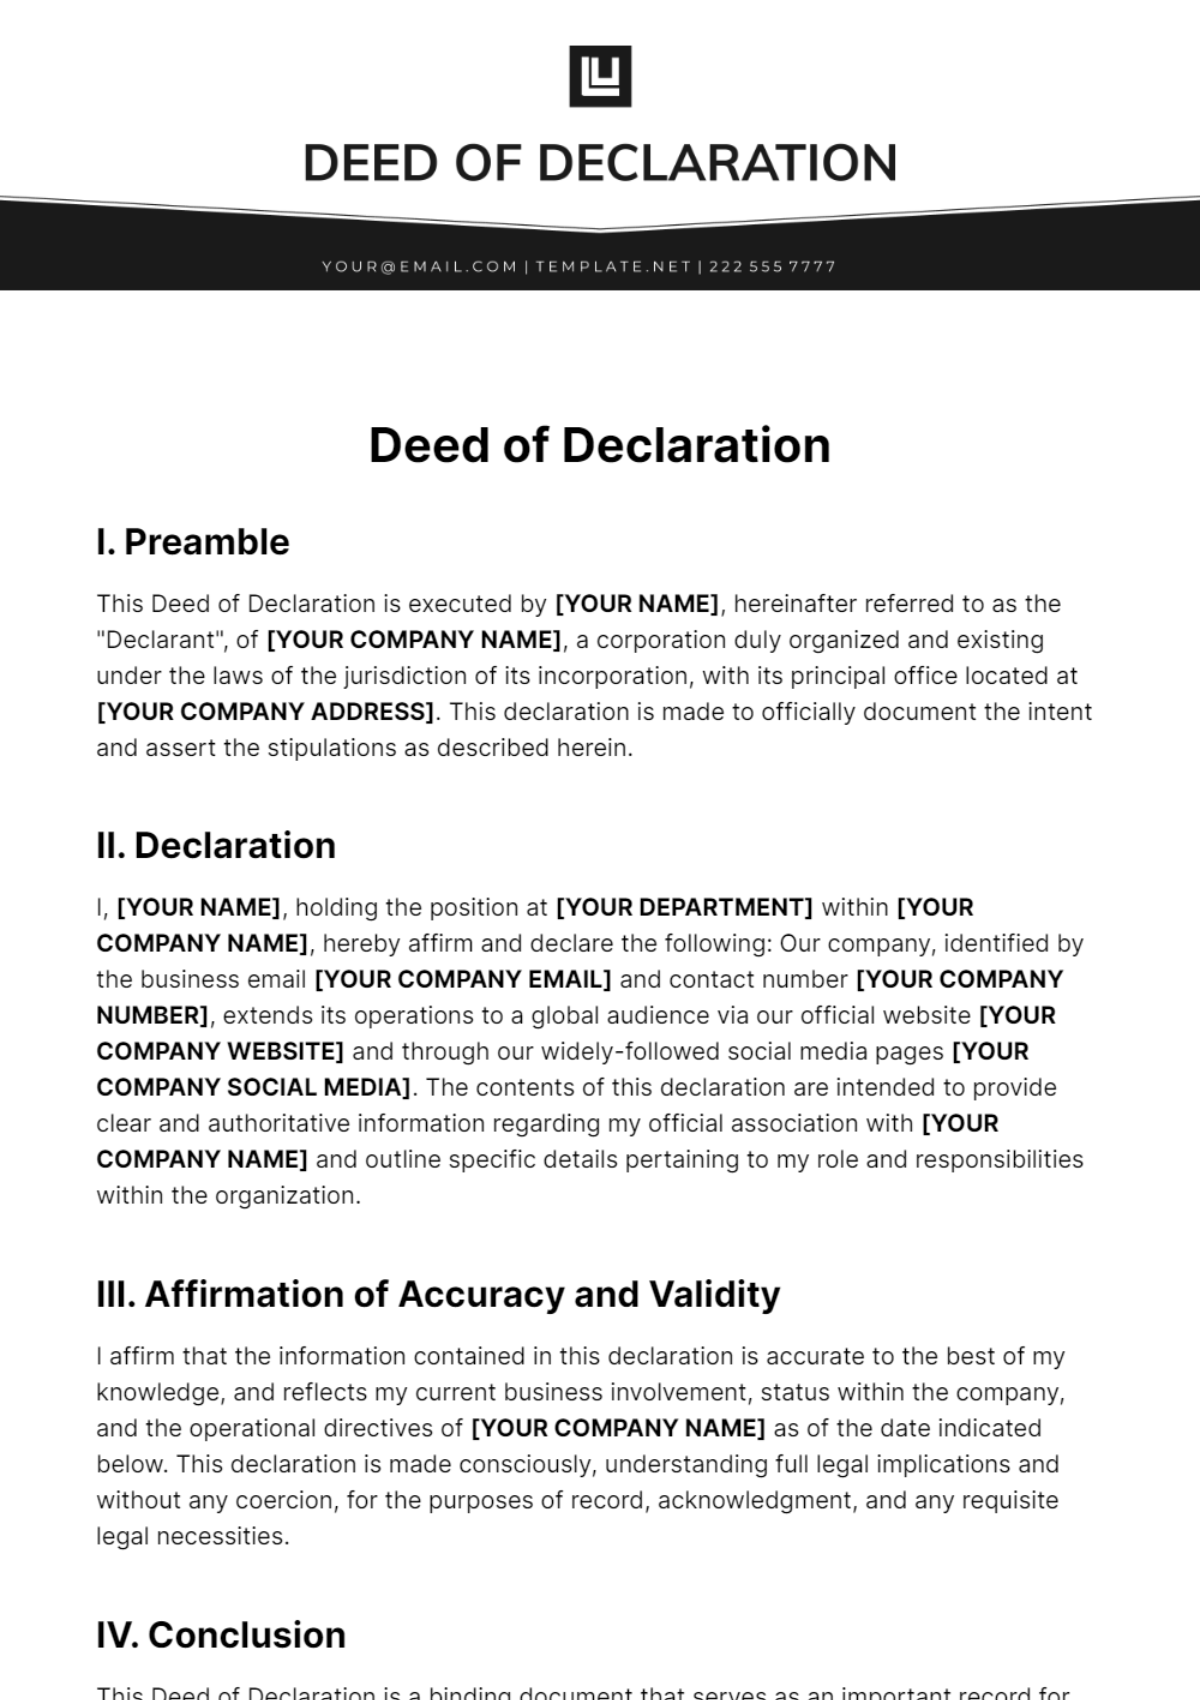 Free Deed of Declaration Template